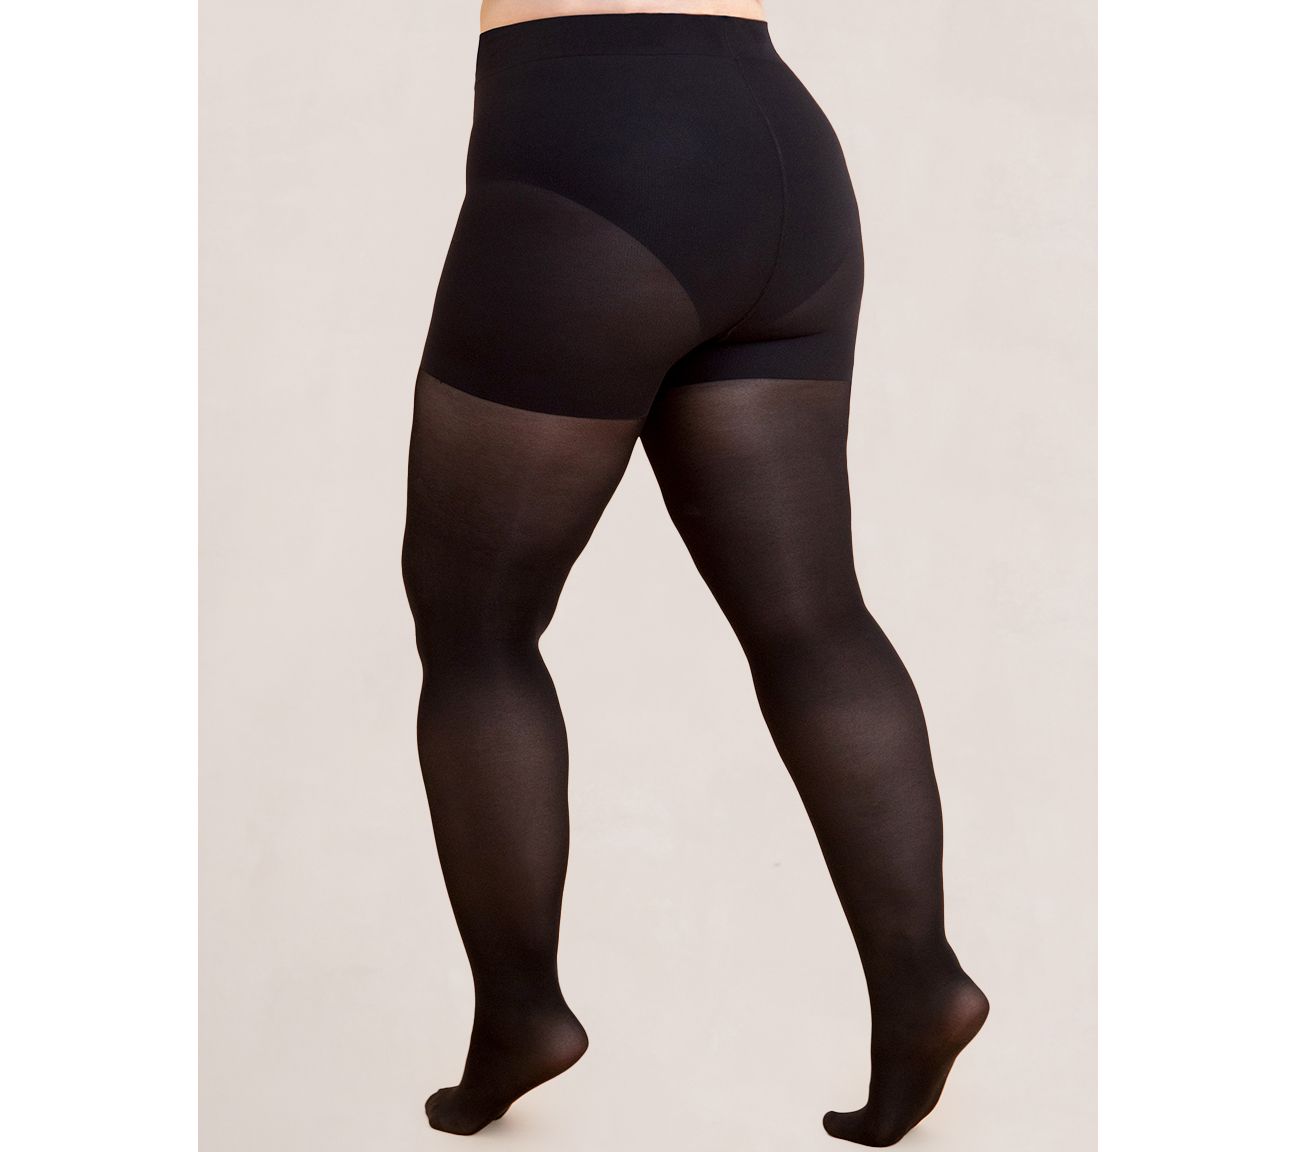 Shapermint Essentials Shaper Tights in Chocolate